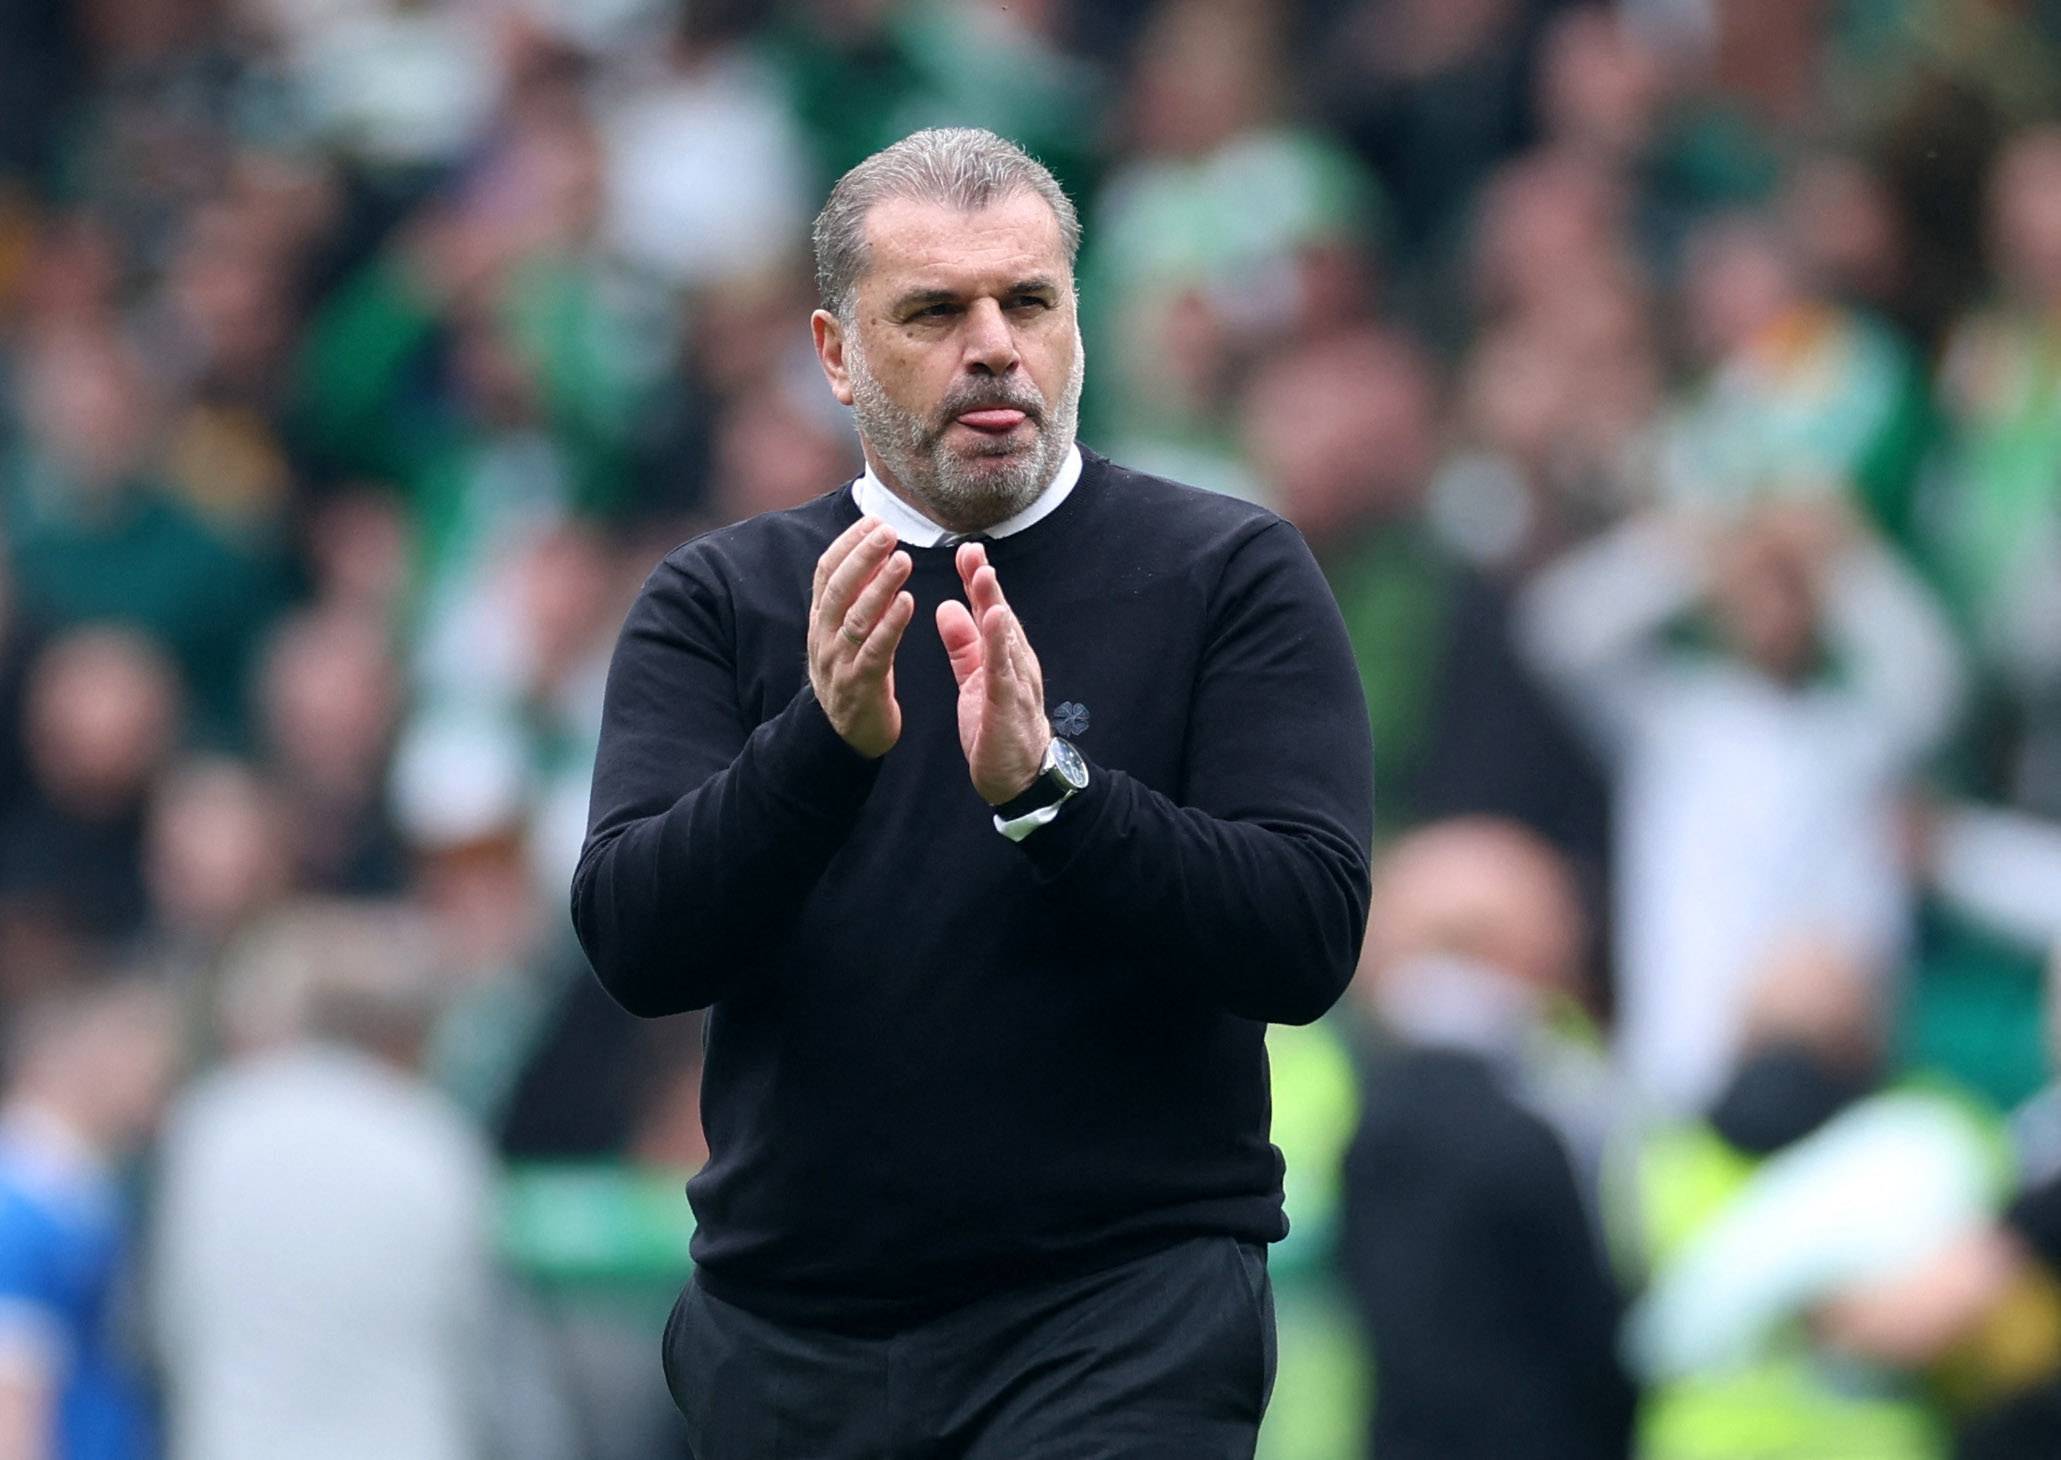 Ange Postecoglou leading Celtic out in an Old Firm derby